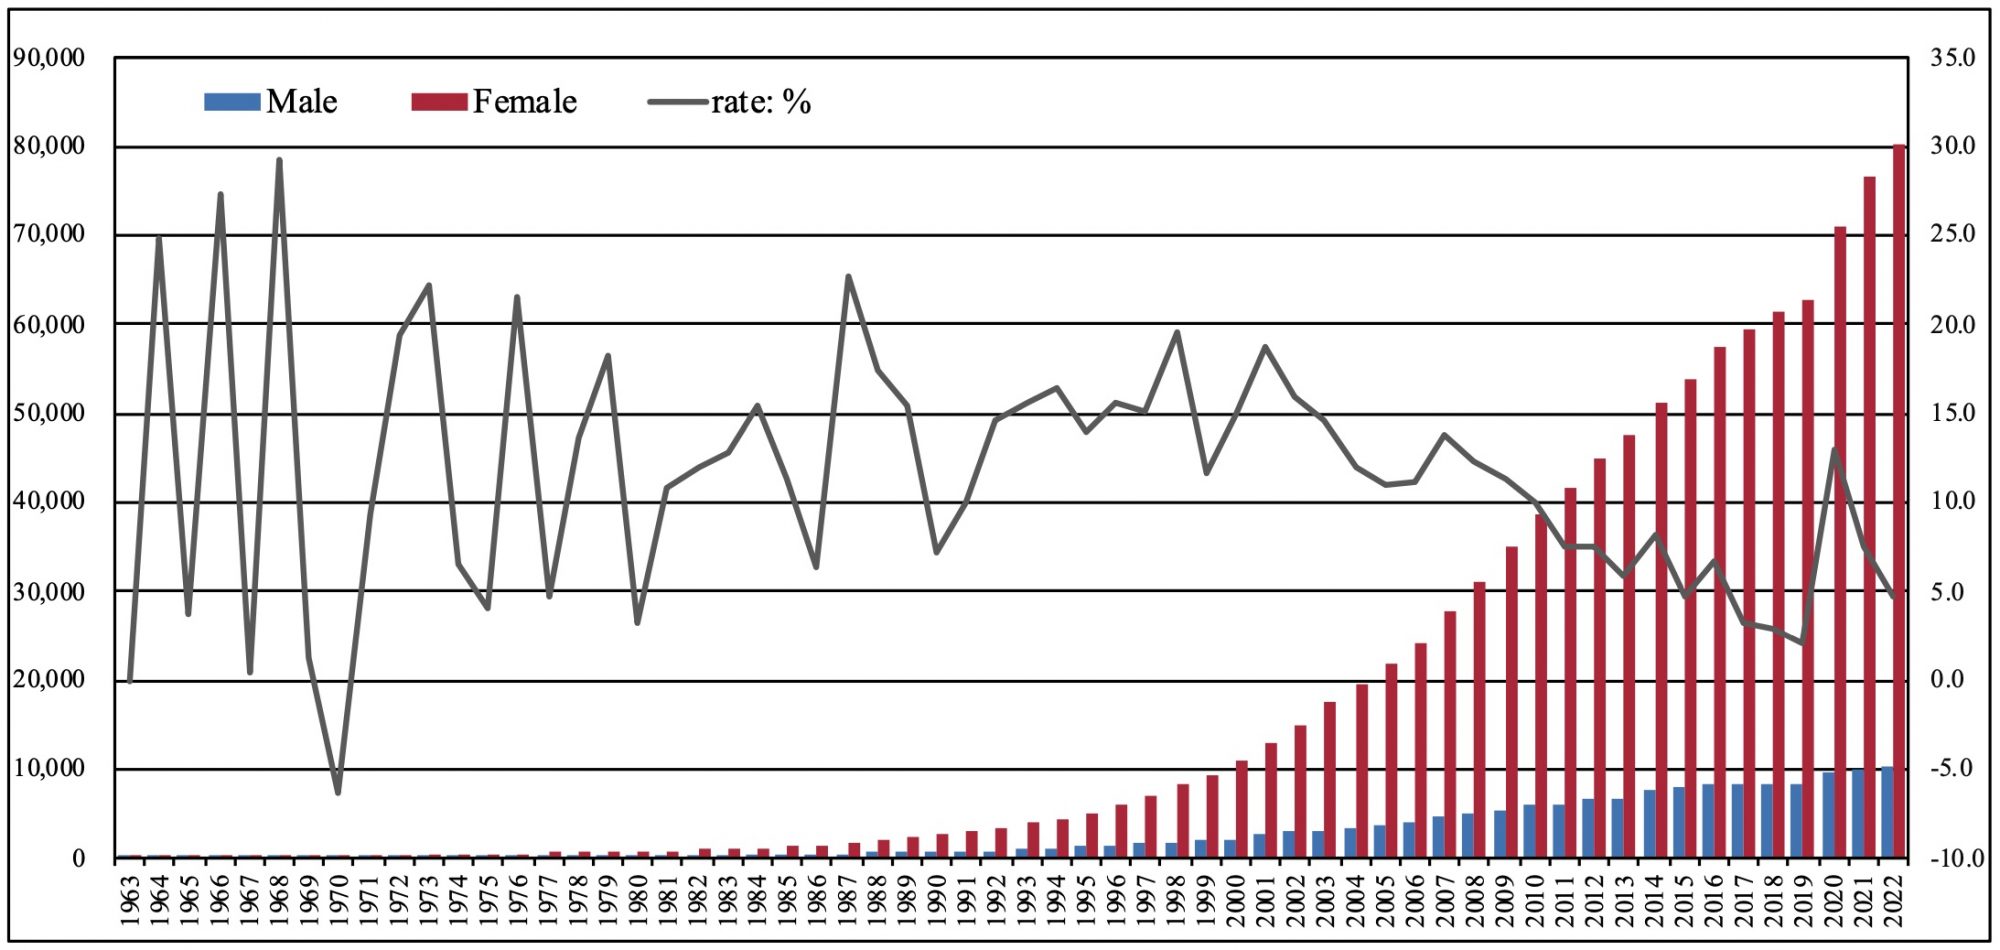 Figure 2. Trends in population aged 100 years and above in Japan